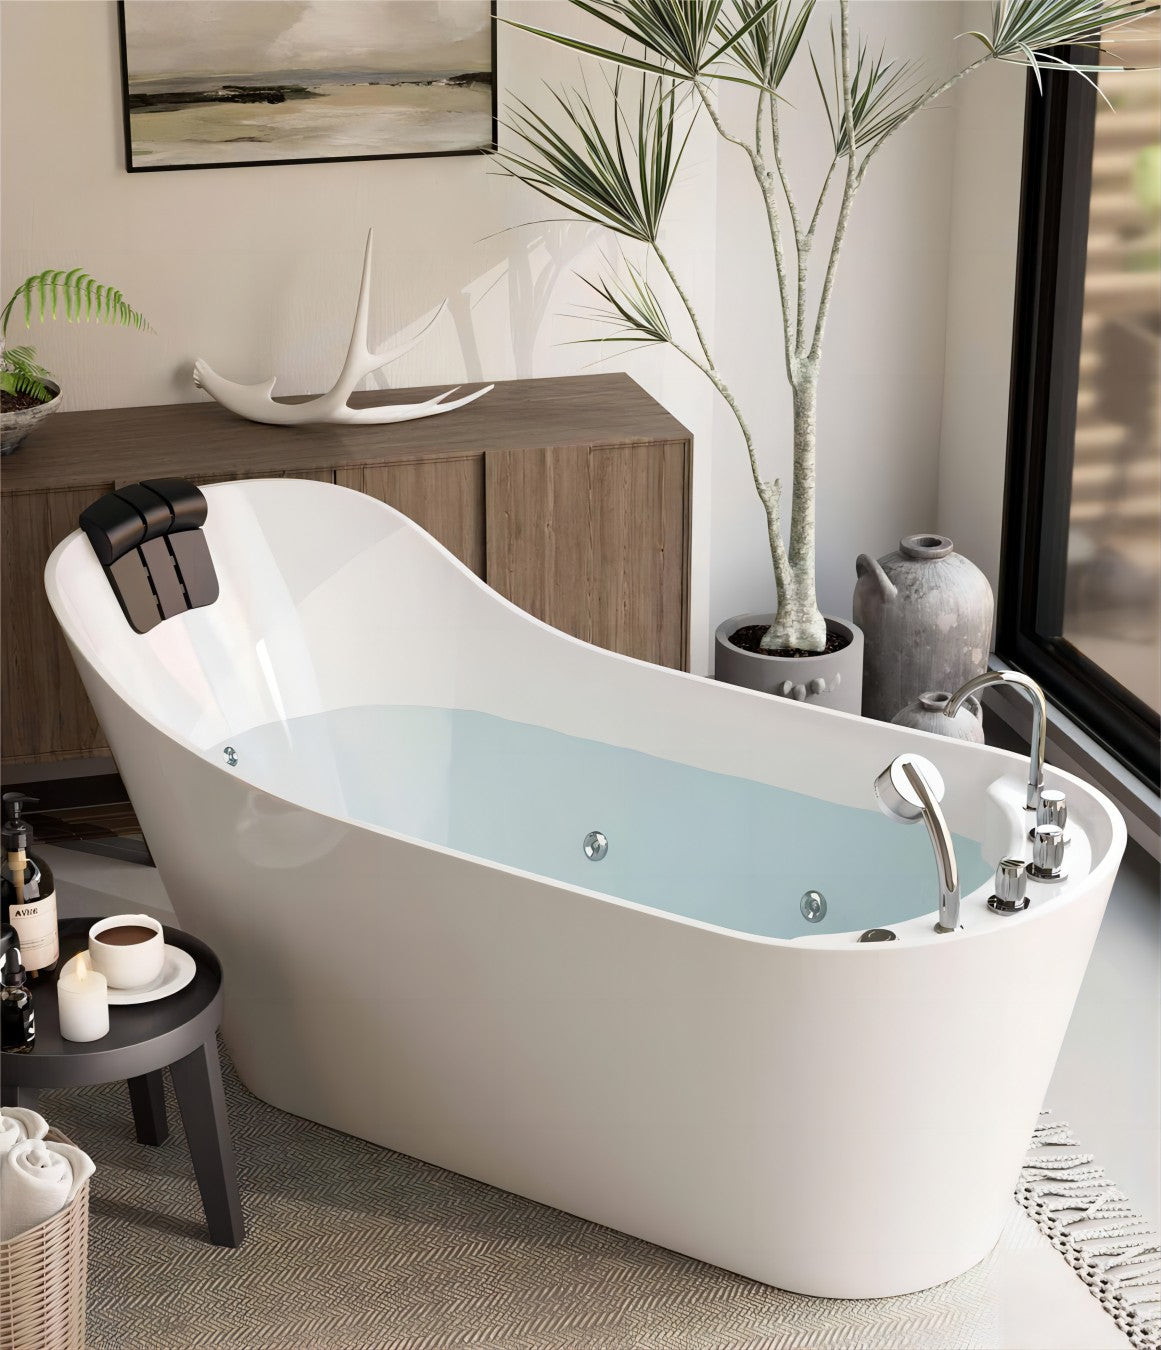 Whirlpool Bathtub suppliers in the USA